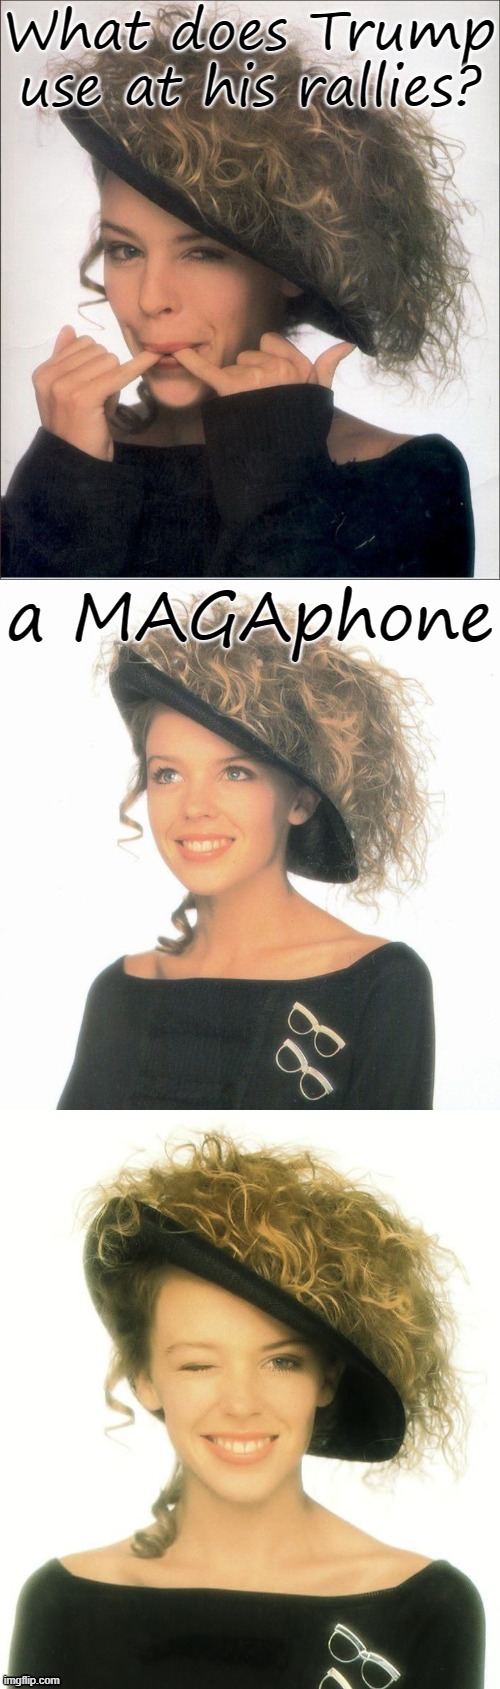 Trying out my new Bad Pun Kylie Minogue hat template! | What does Trump use at his rallies? a MAGAphone | image tagged in bad pun kylie minogue hat,bad pun,new template,custom template,maga,megaphone | made w/ Imgflip meme maker